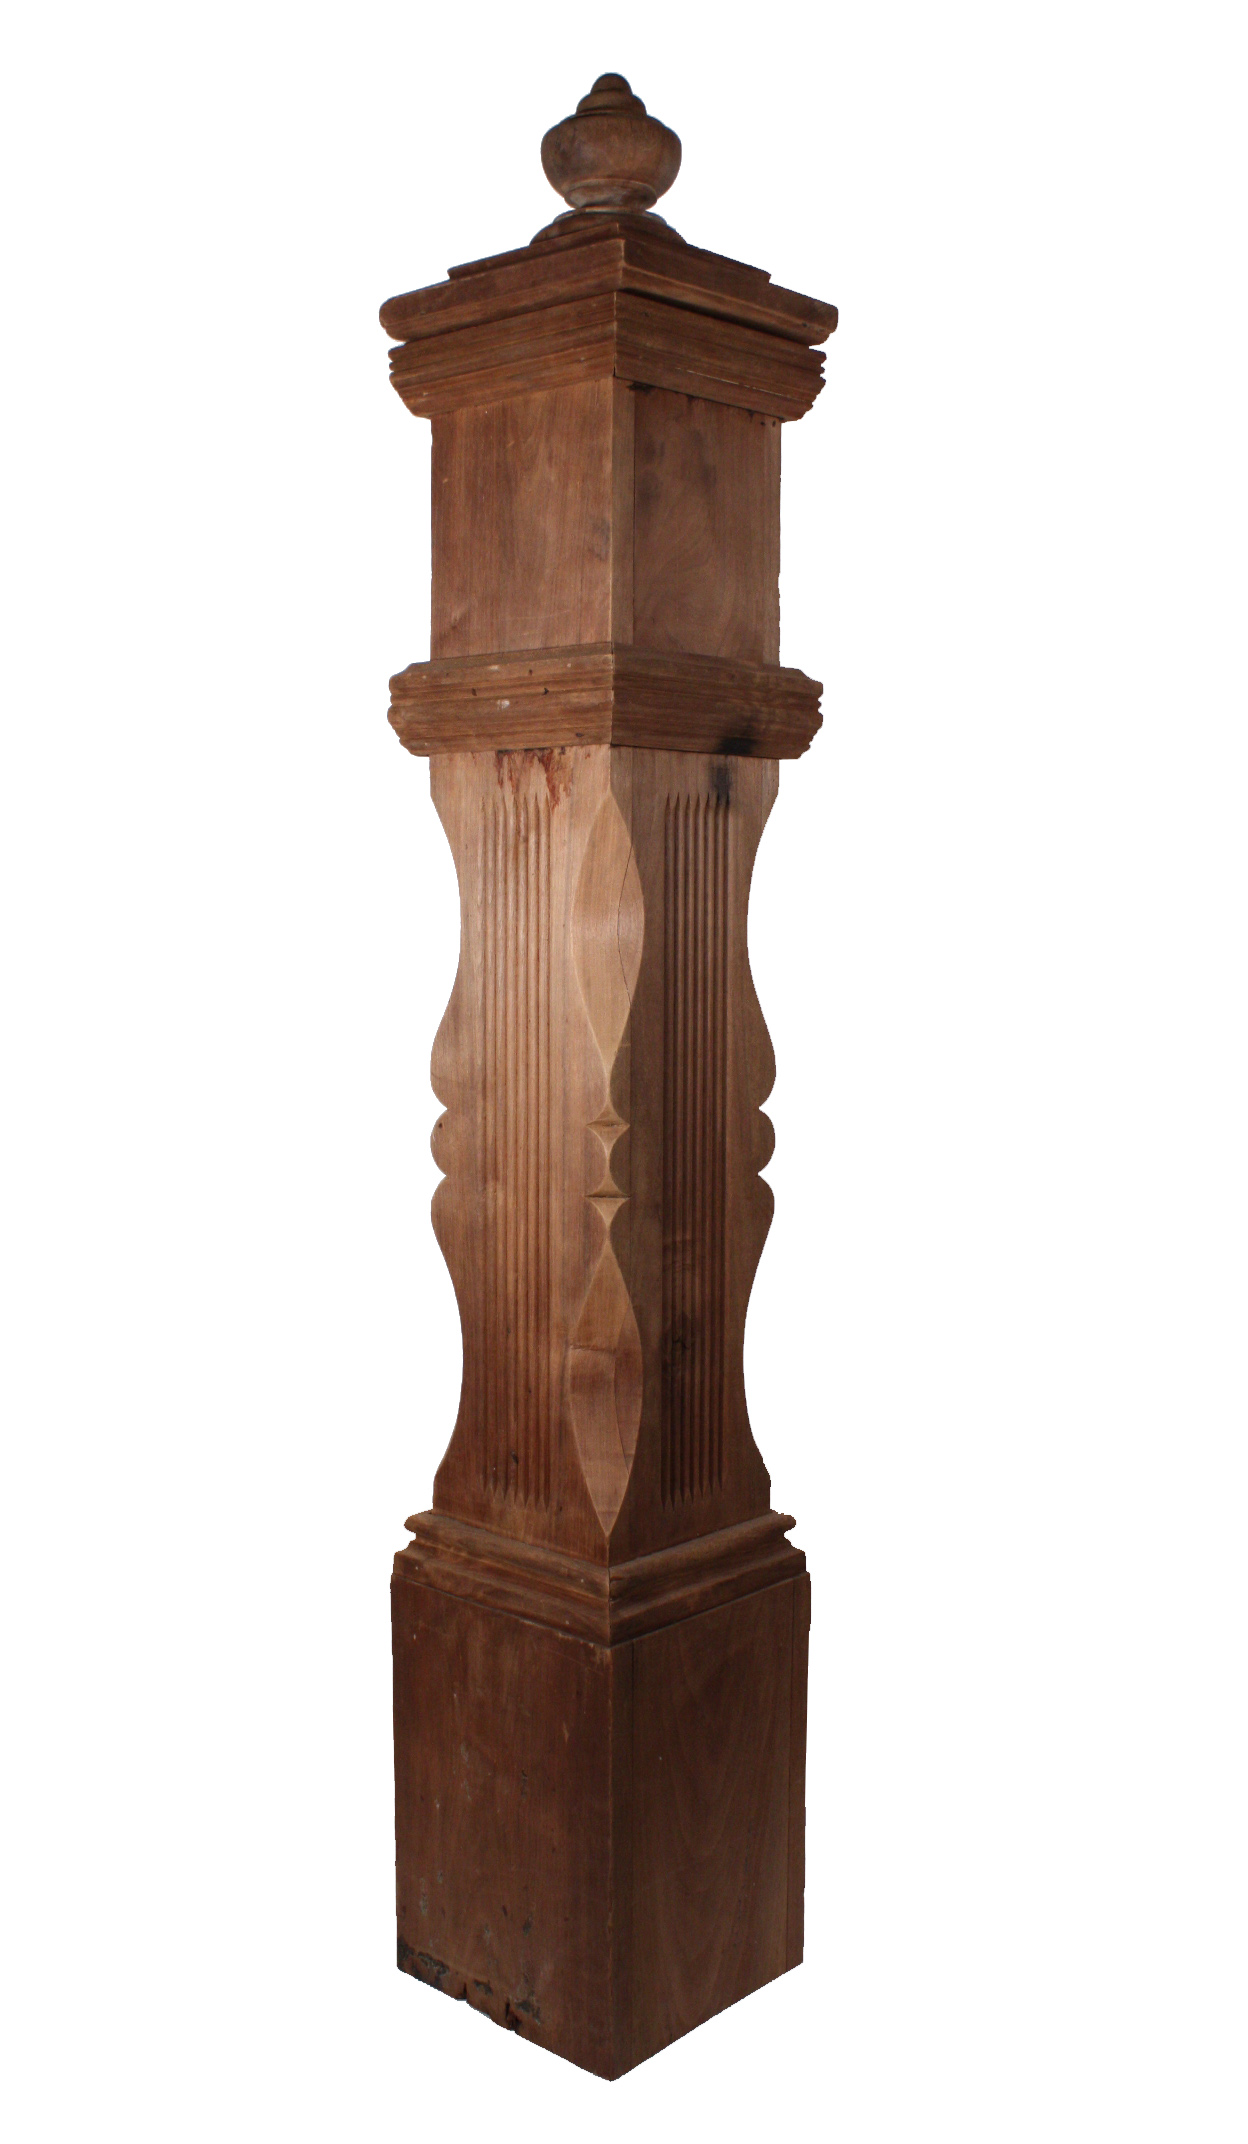 SOLD Superb Antique Walnut Boxed Newel Post, 19th Century-19119